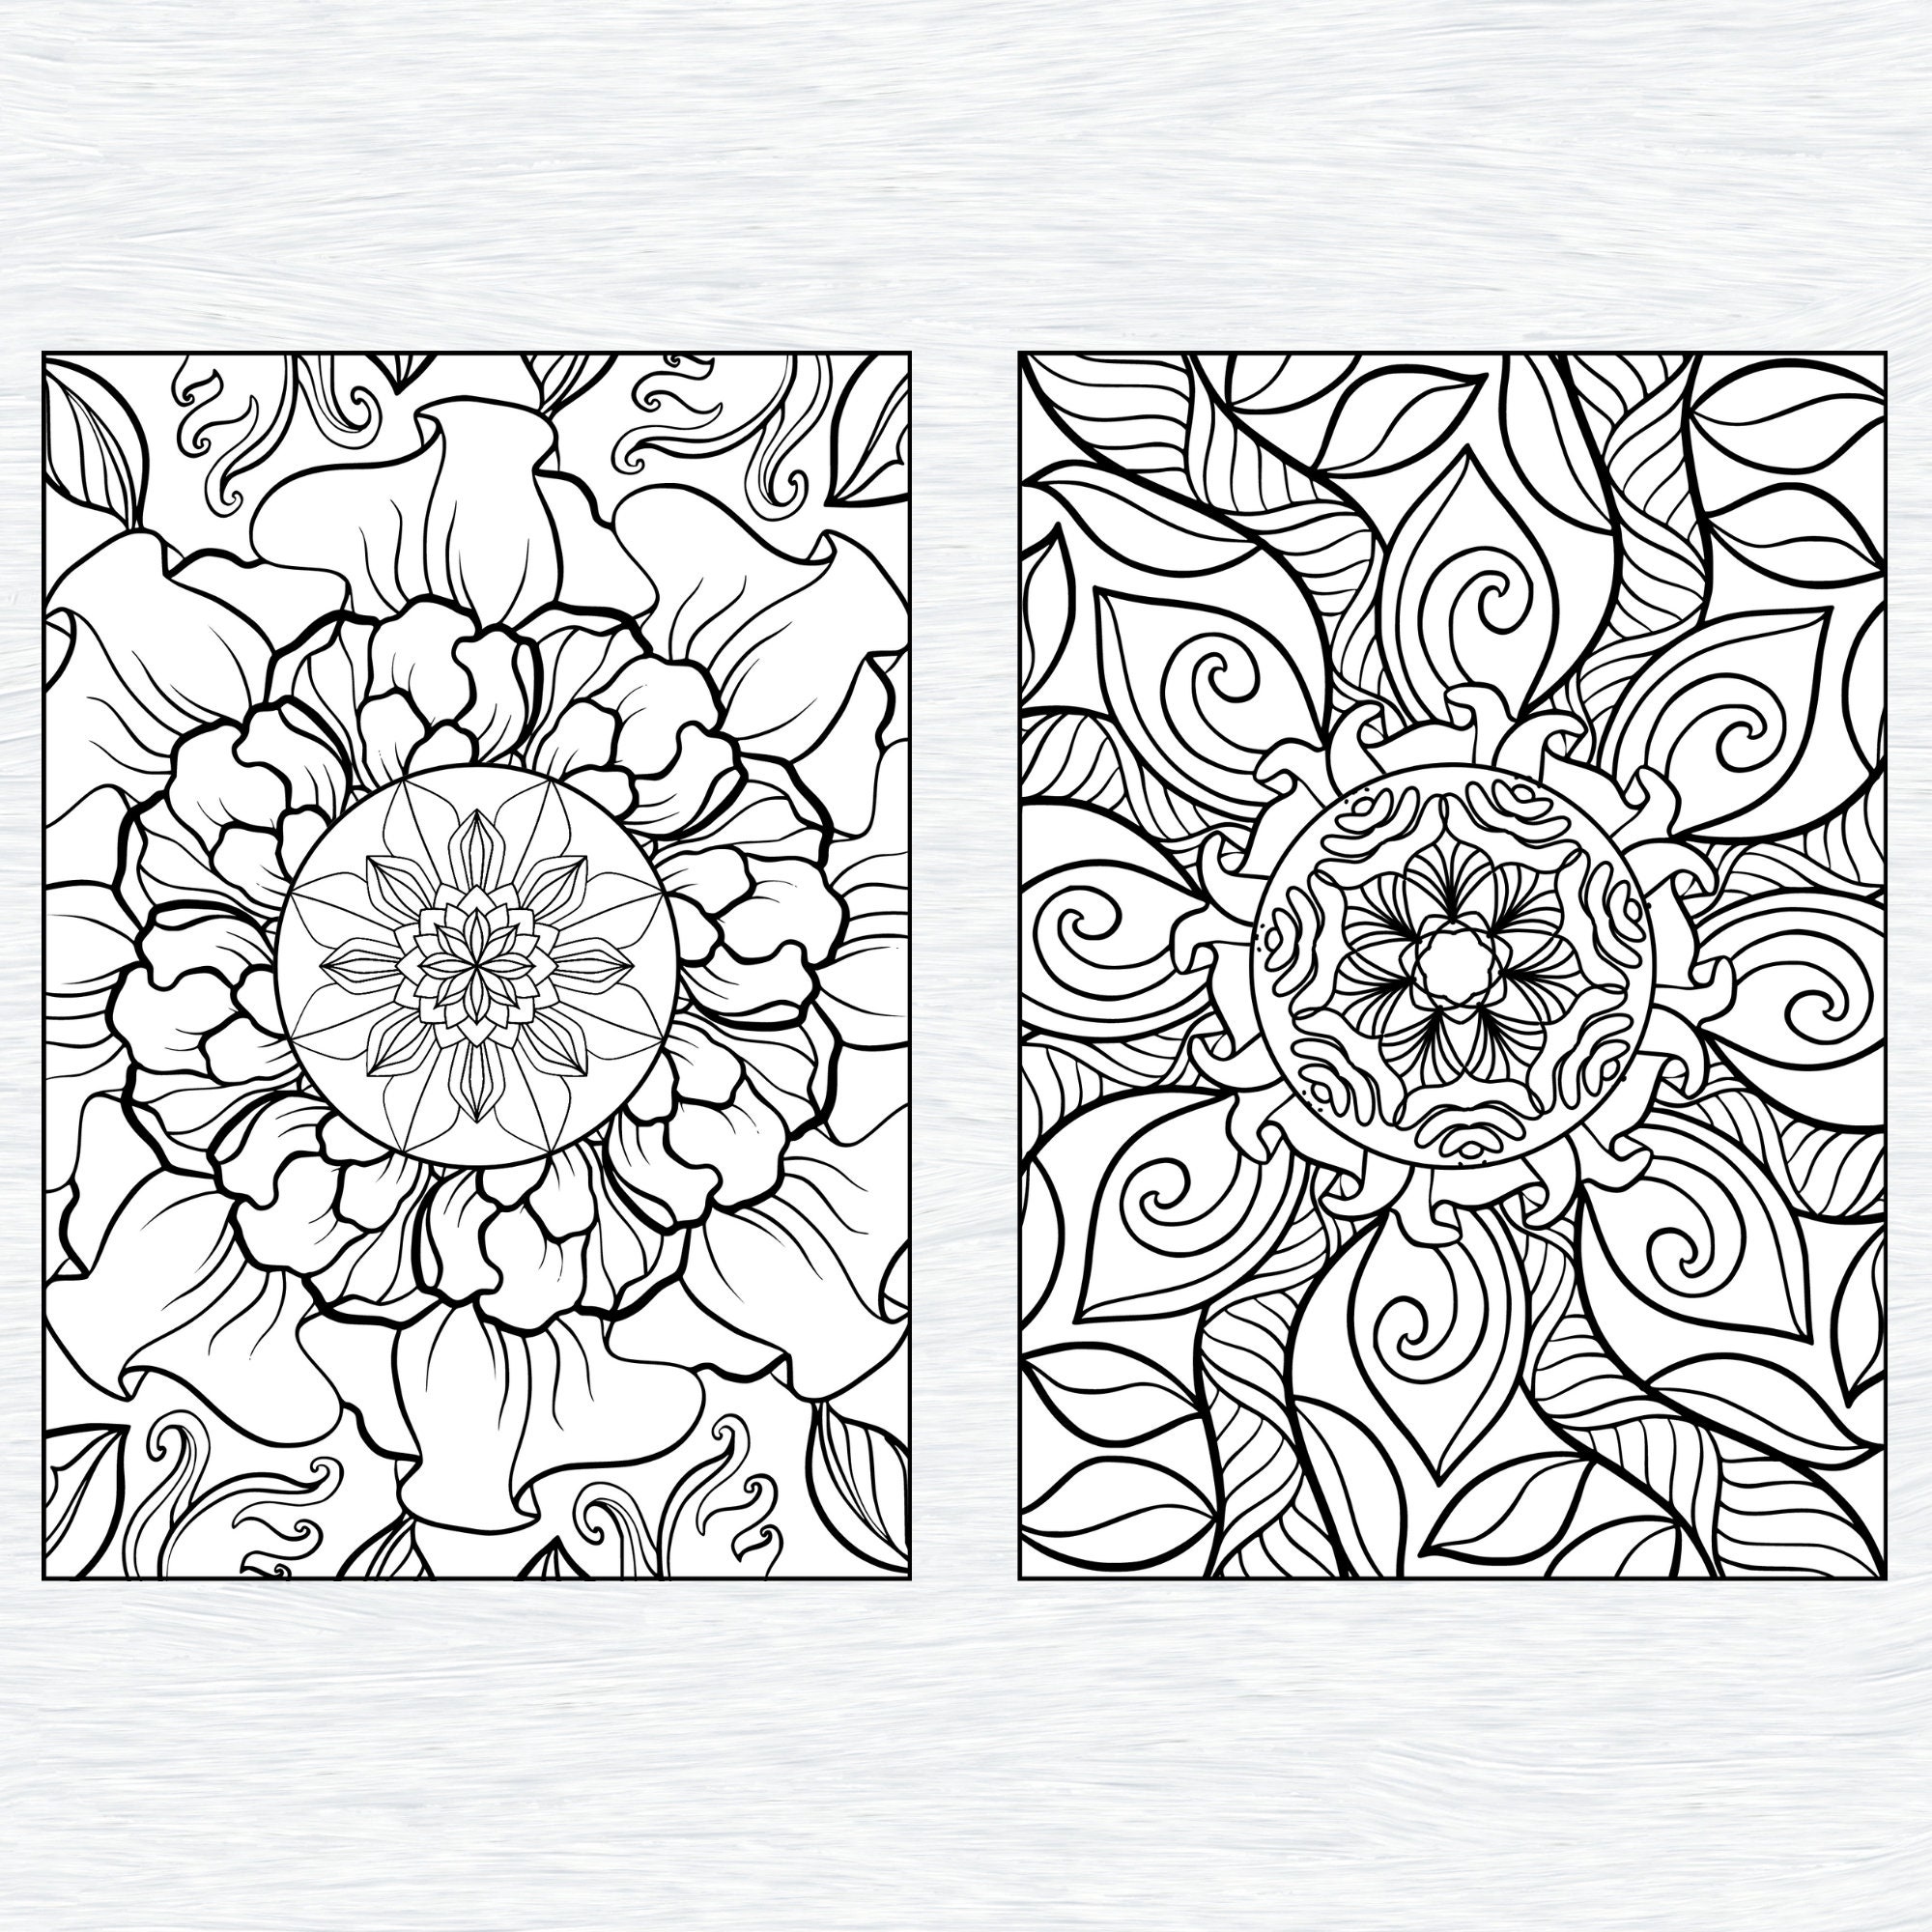 Creative Mandalas: An Adult Coloring Book with Relaxing and Creative  Mandala Coloring Pages Perfect for Relaxation Gifts for Women copy:  9798593622518